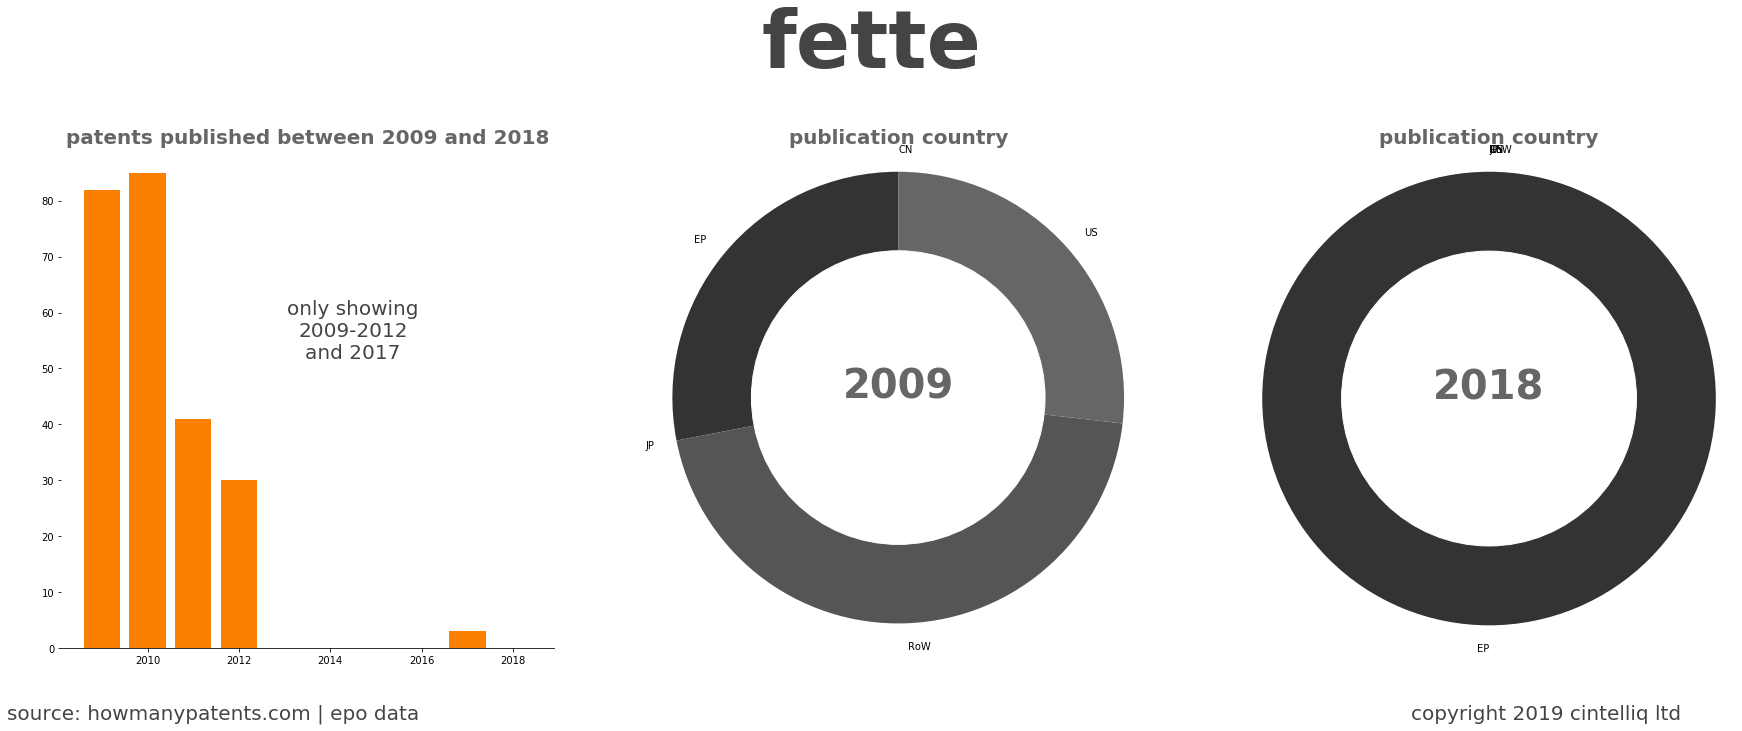 summary of patents for Fette